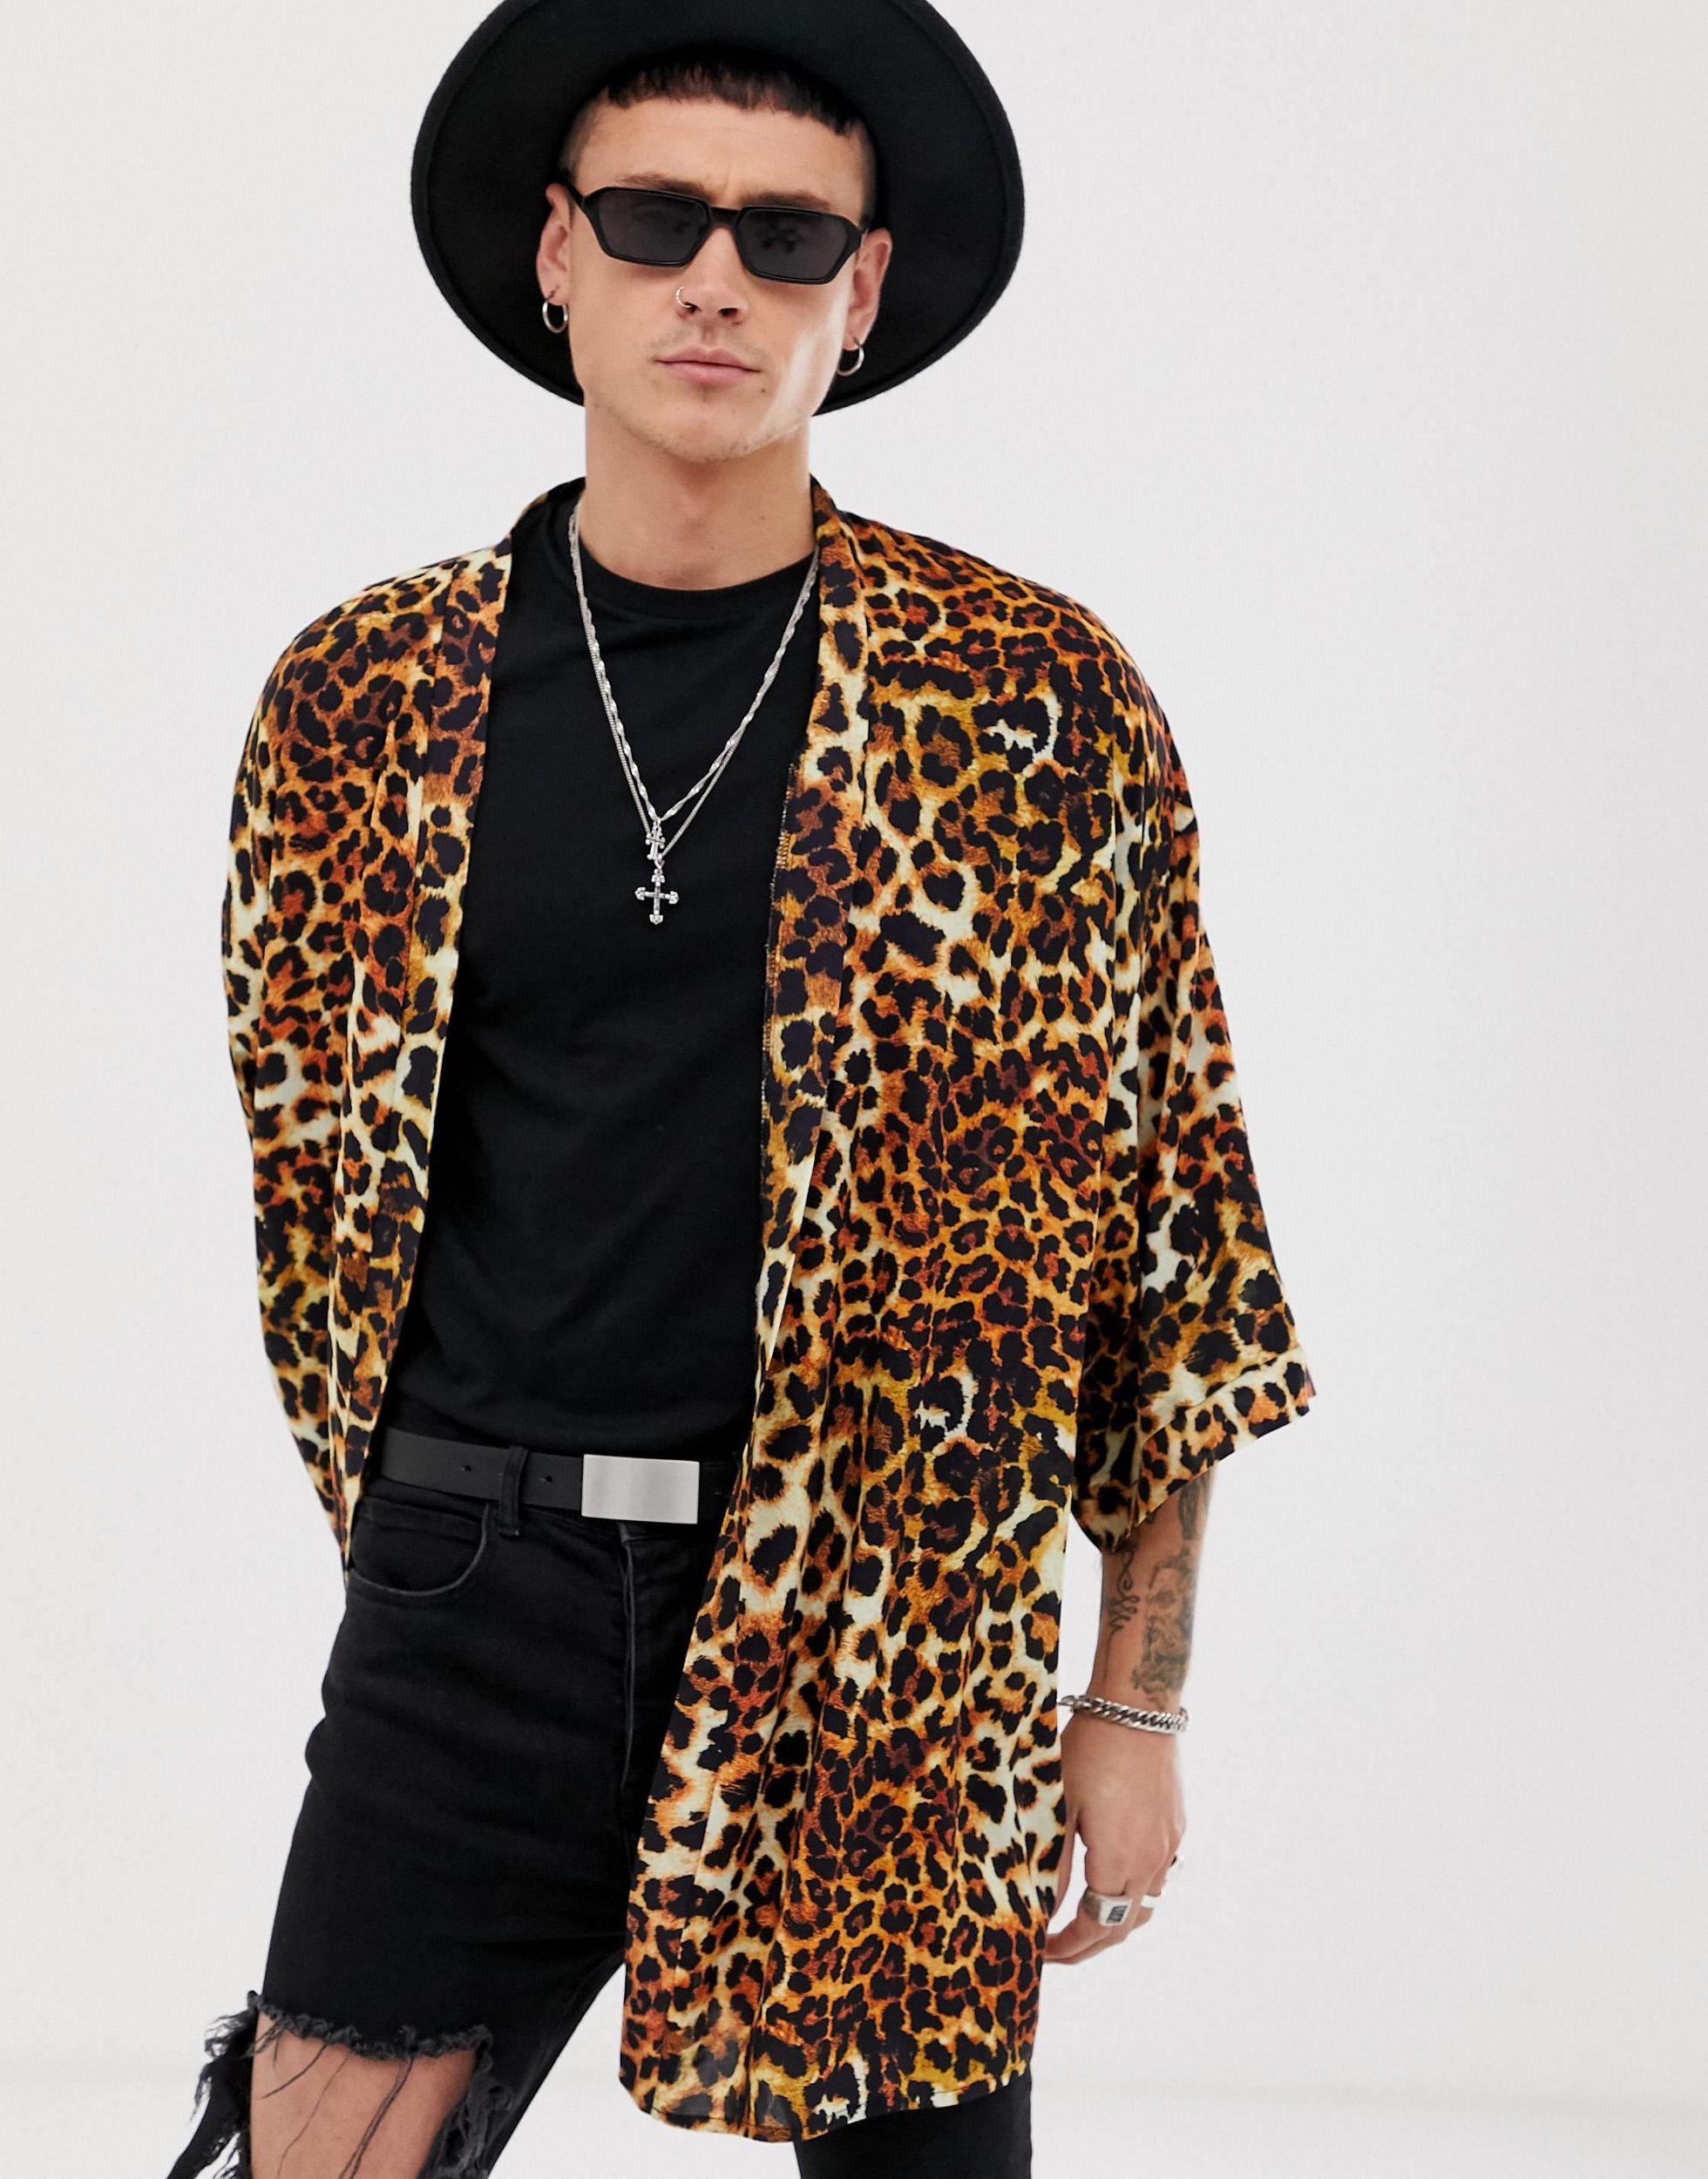 ASOS Synthetic Leopard Print Kimono in Brown for Men - Lyst